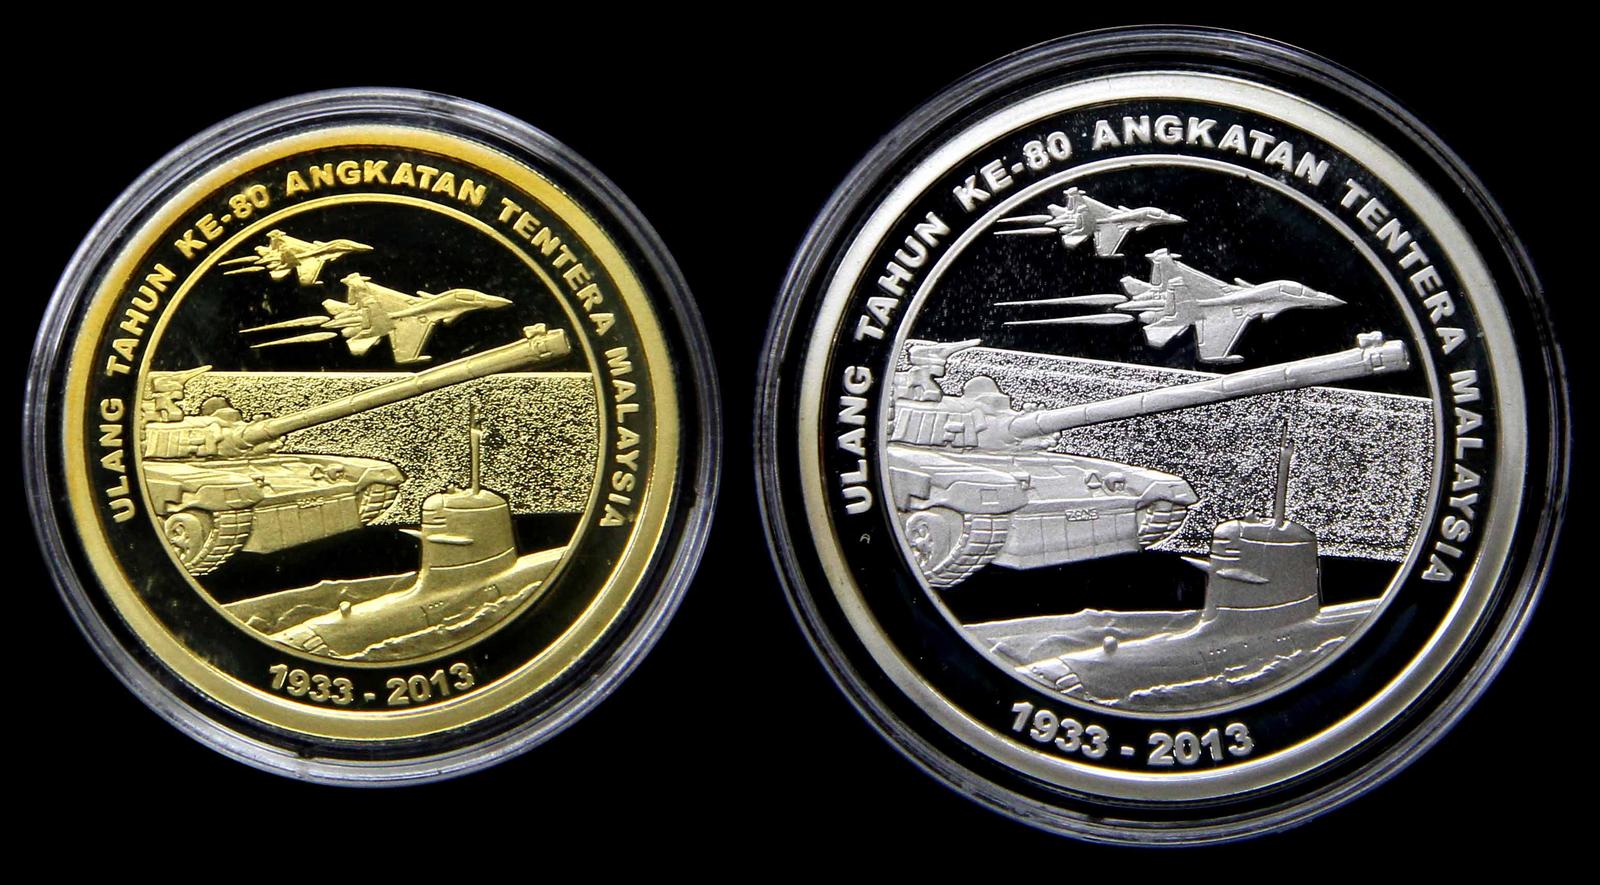 Malaysian Armed Forces Challenge Coin